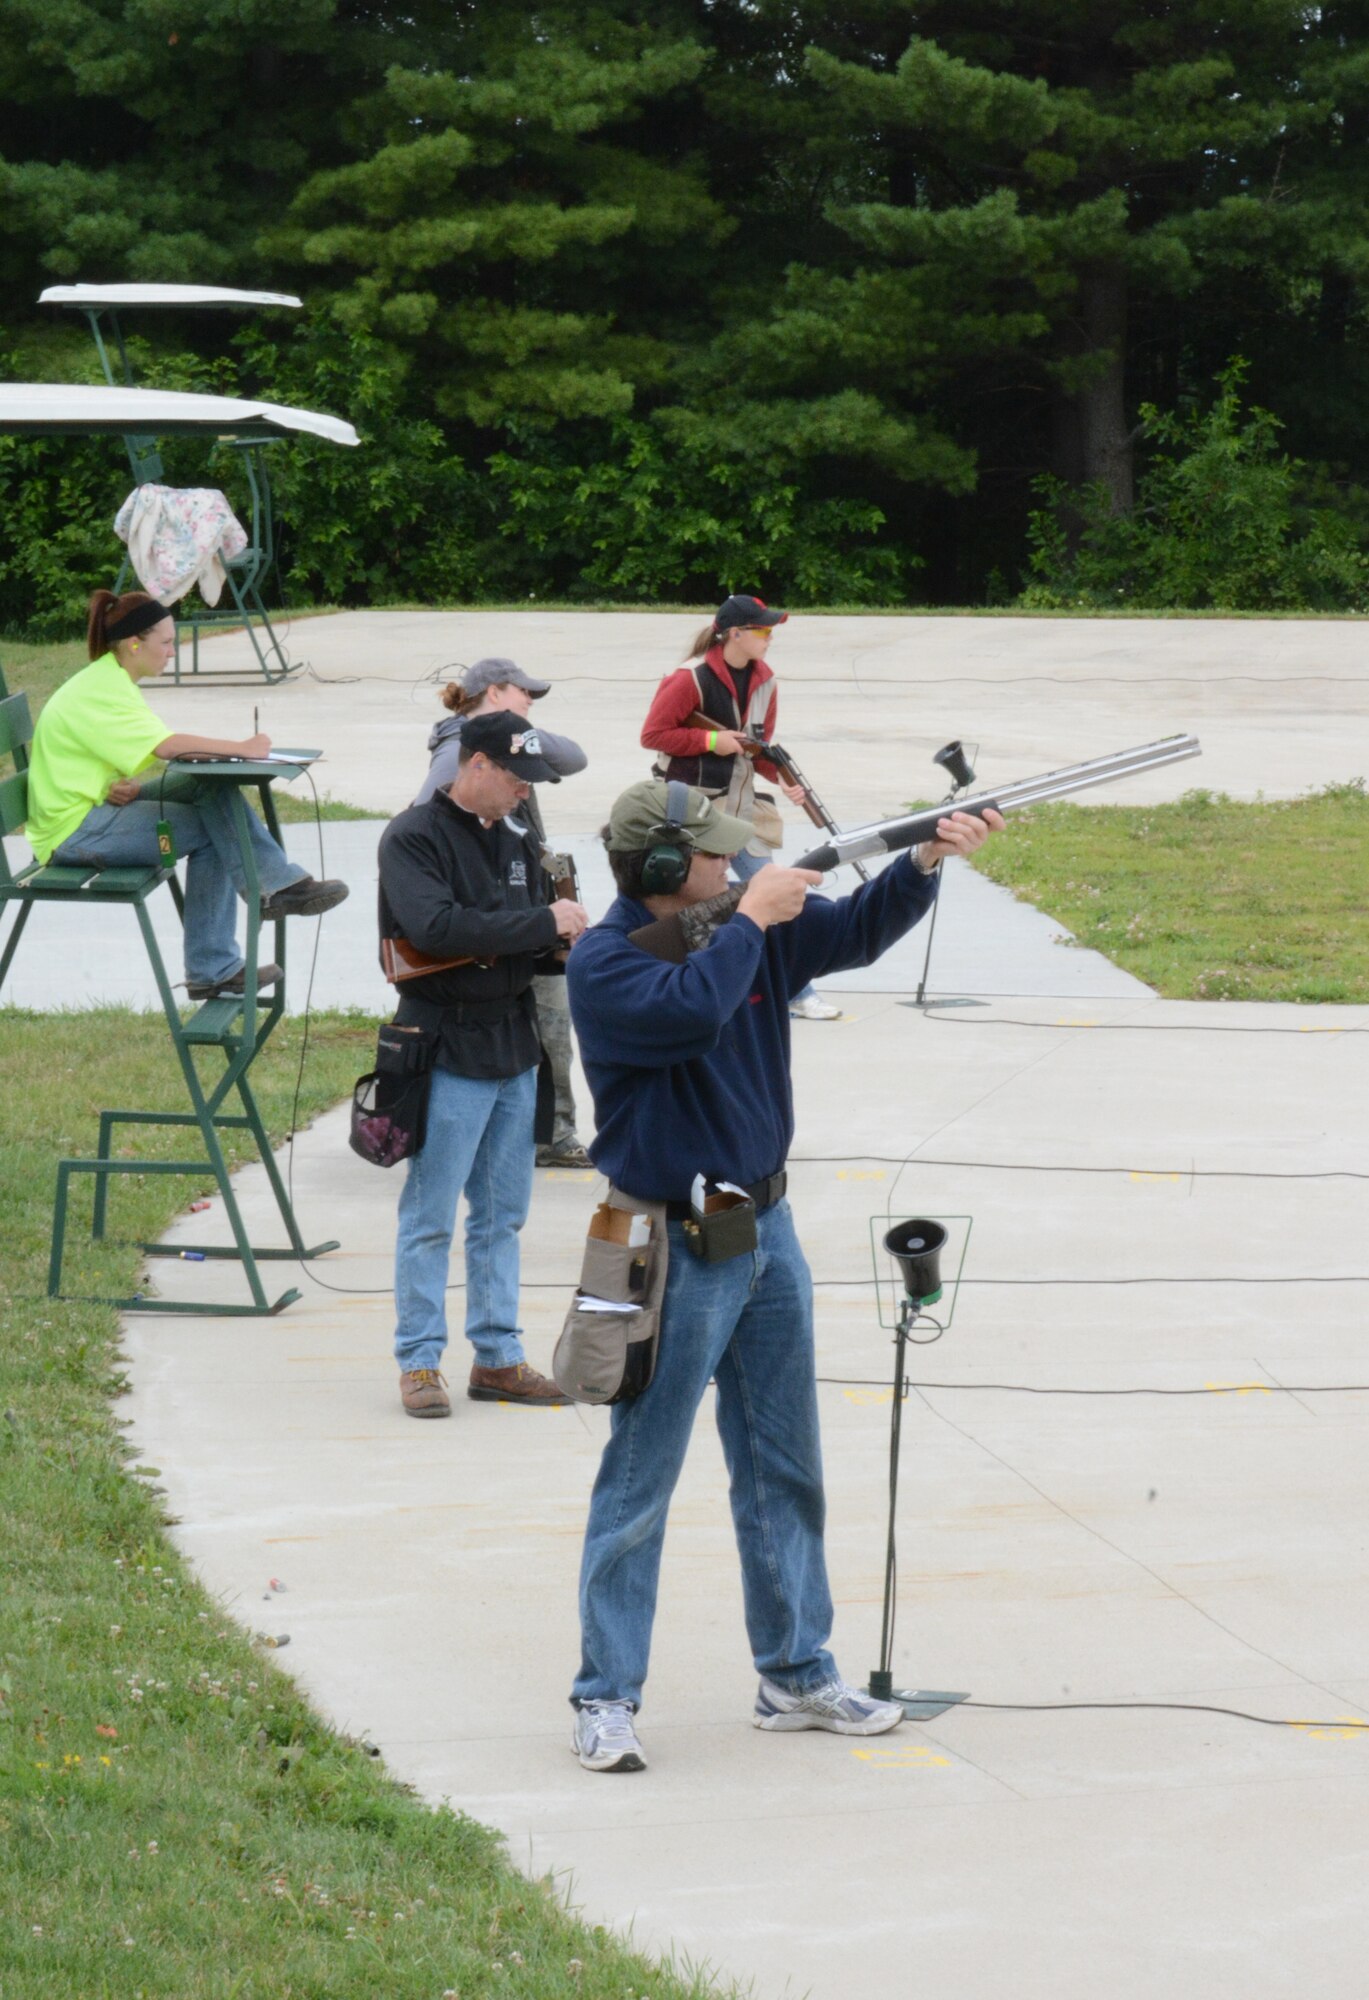 Participants take turns aiming at their clay targets during the shotgun portion of the 2nd Annual Explosive Ordnance Disposal Warrior 3-Gun Shoot at the Deerfield Rod and Gun Club in Deerfield, Wis., July 27, 2013. Glass trophies were handed out to the best shotgun, rifle and pistal shooters during the event that raised approximately $10.000. That money was donated to the EOD Warrior Foundation, an organization that supports EOD warriors and their families, and maintains the EOD Memorial. (Air National Guard photo by Senior Airman Andrea F. Liechti)